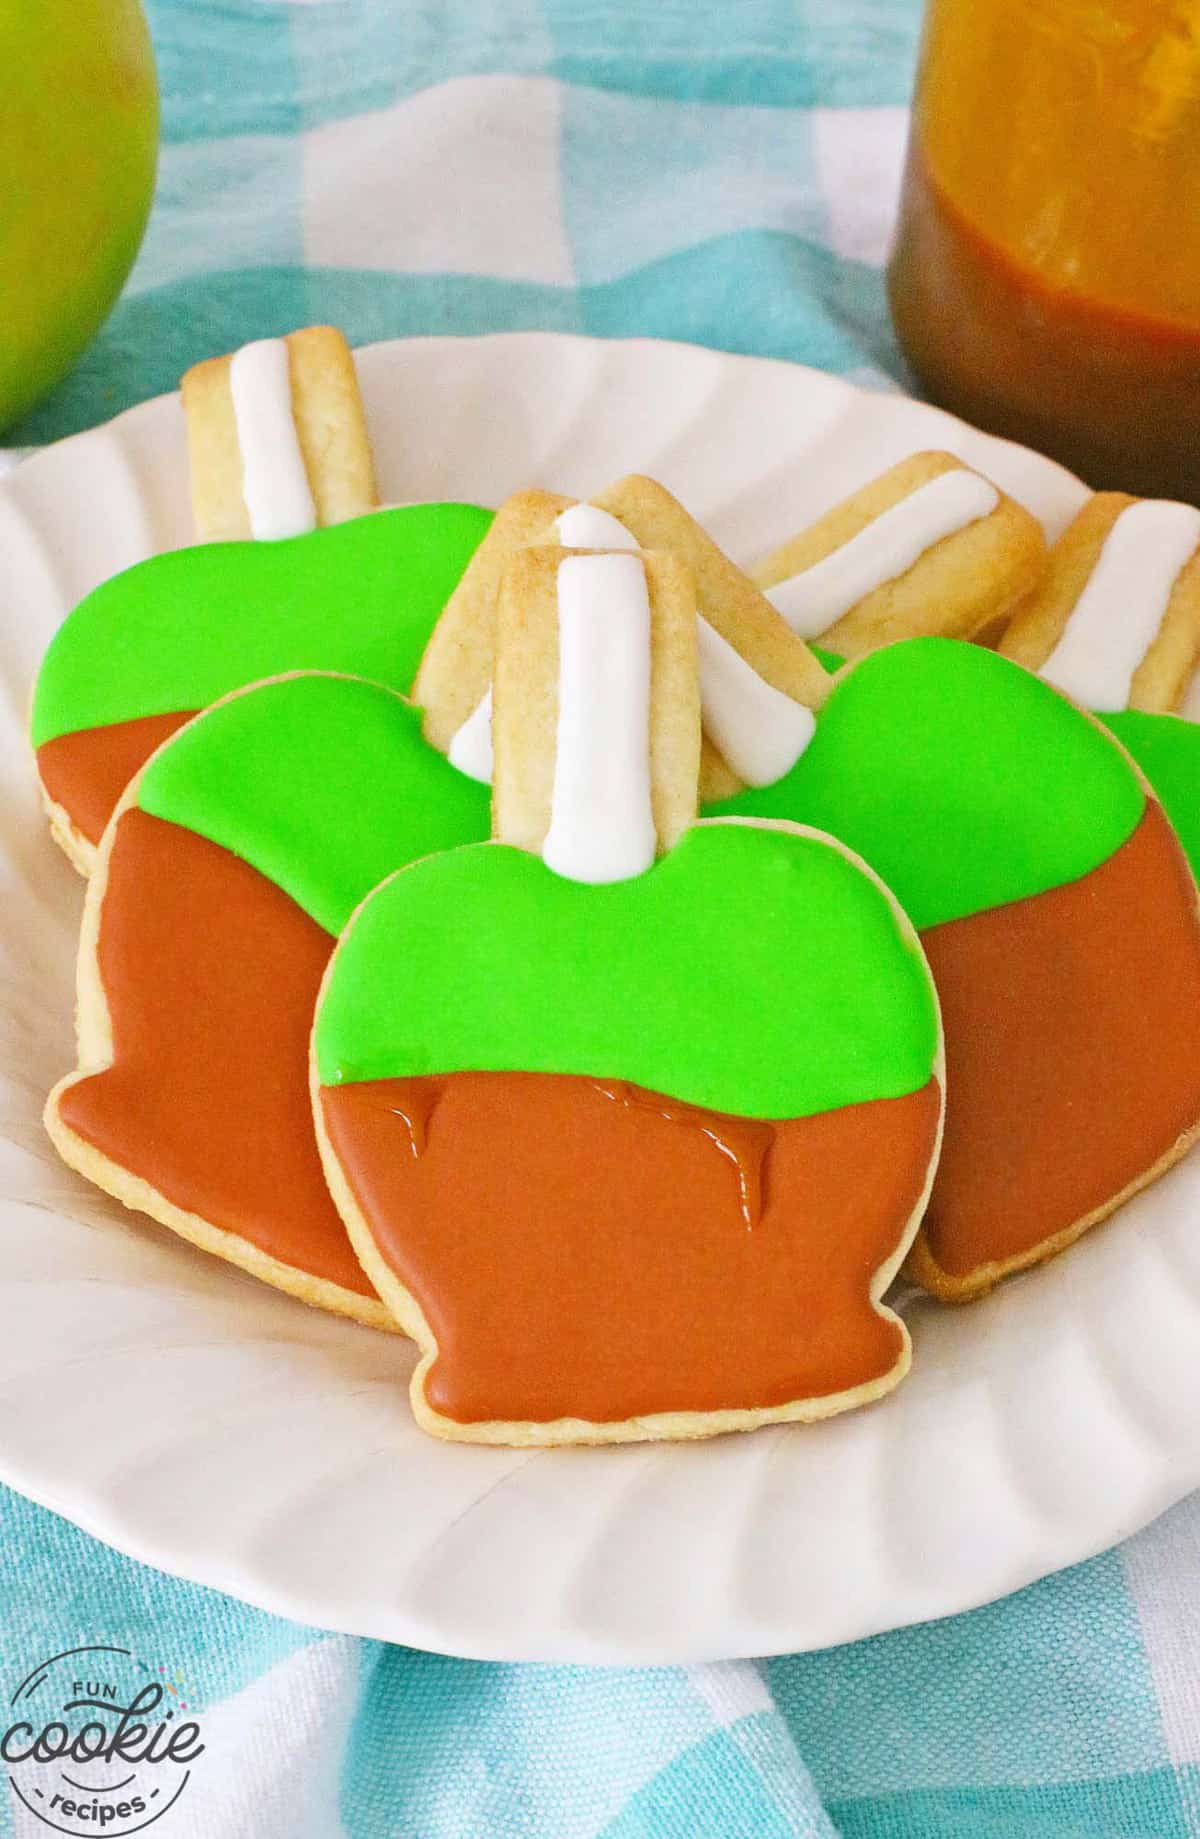 sugar cookies decorated to look like candy apples